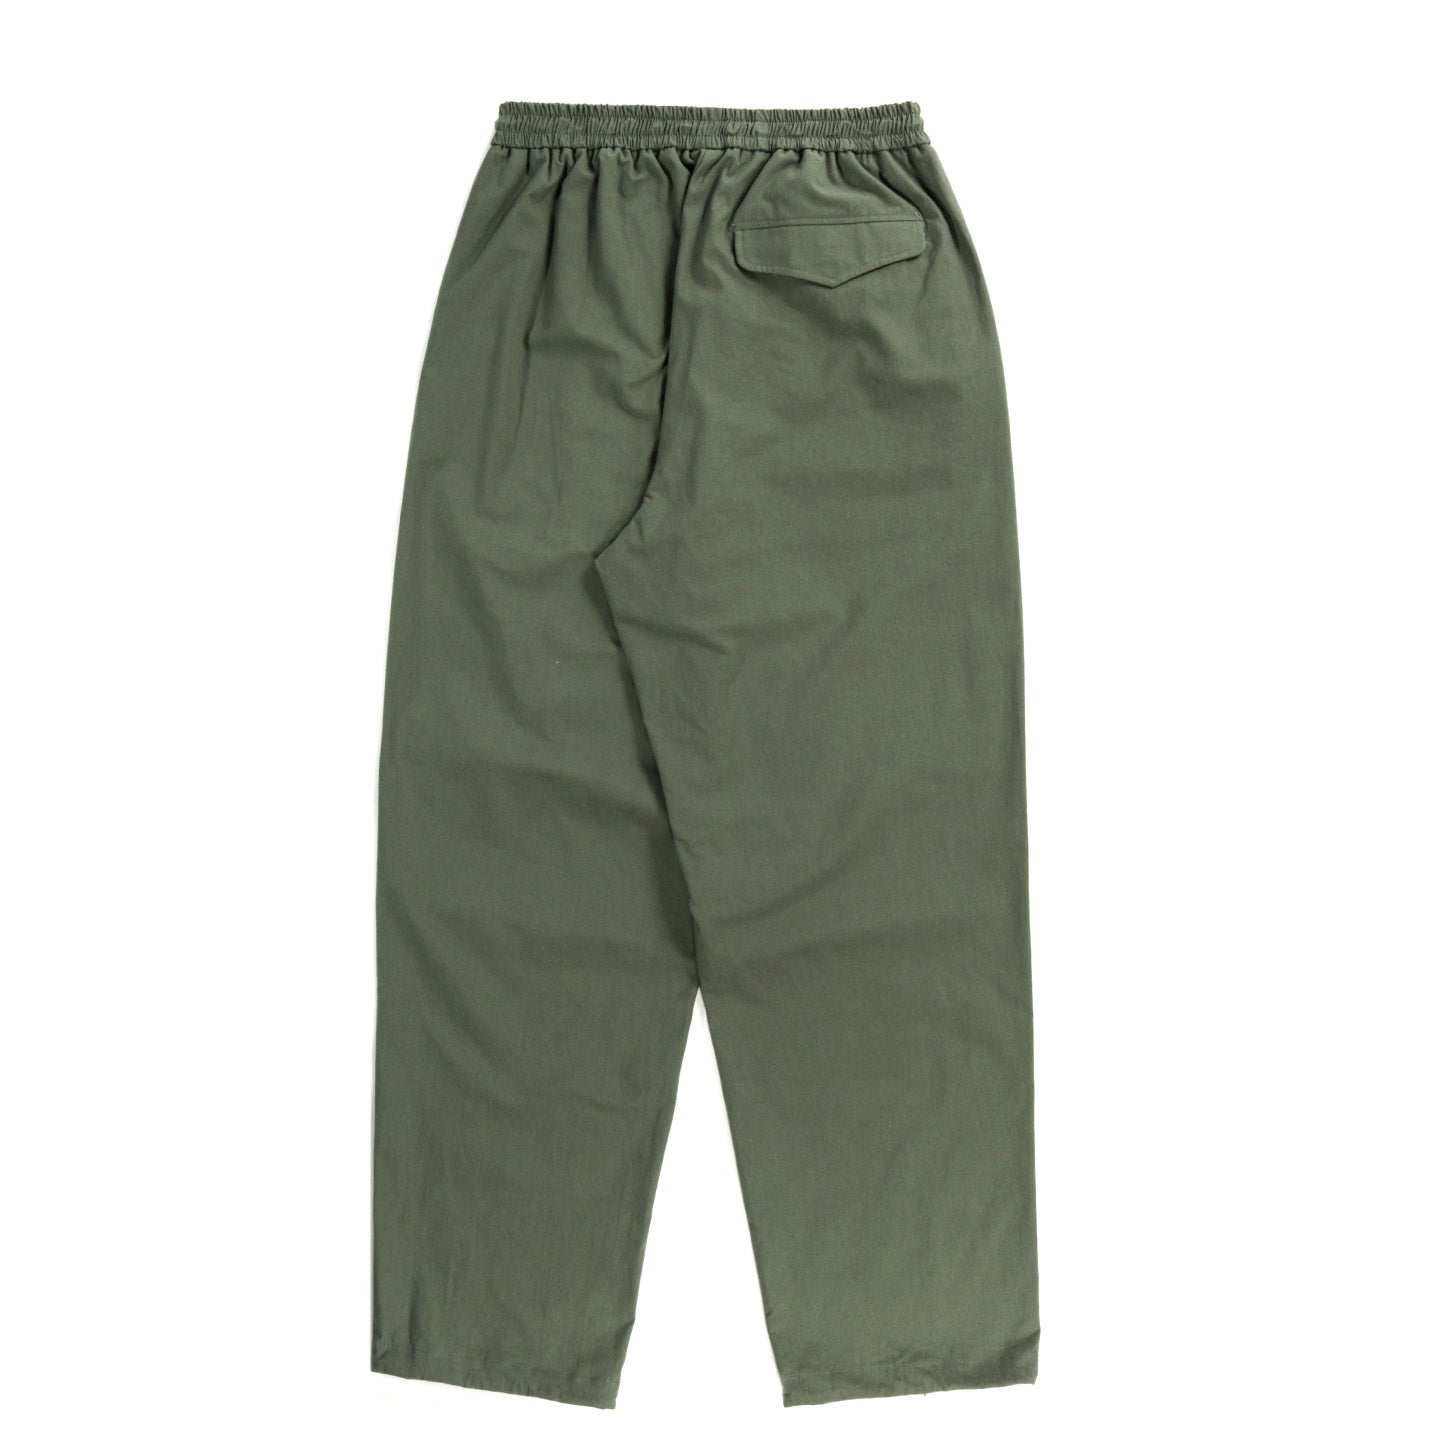 S.K. MANOR HILL M100 PANT OLIVE COTTON